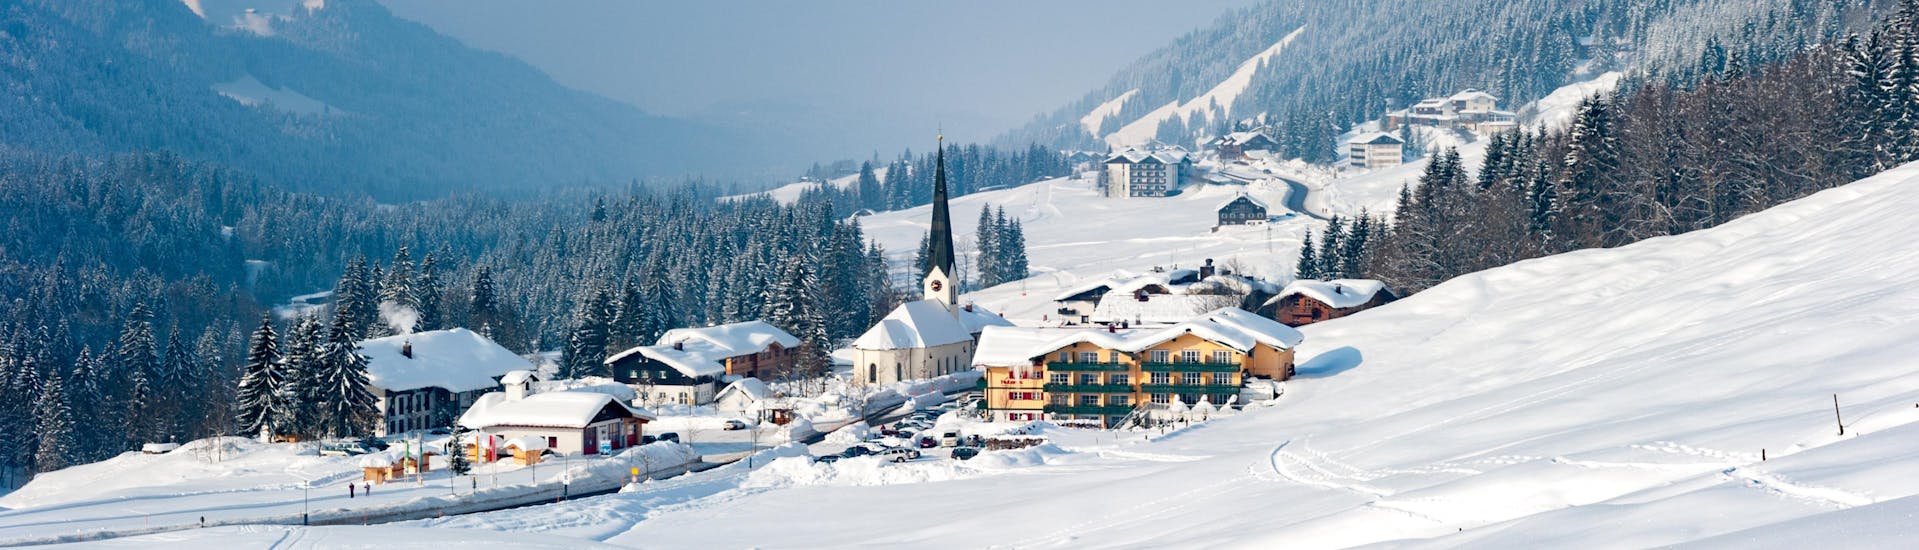 An image of the dreamy little Bavarian village of Baldersachwang in winter, a popular ski resort in which visitors can book ski lessons with one of the local ski schools.